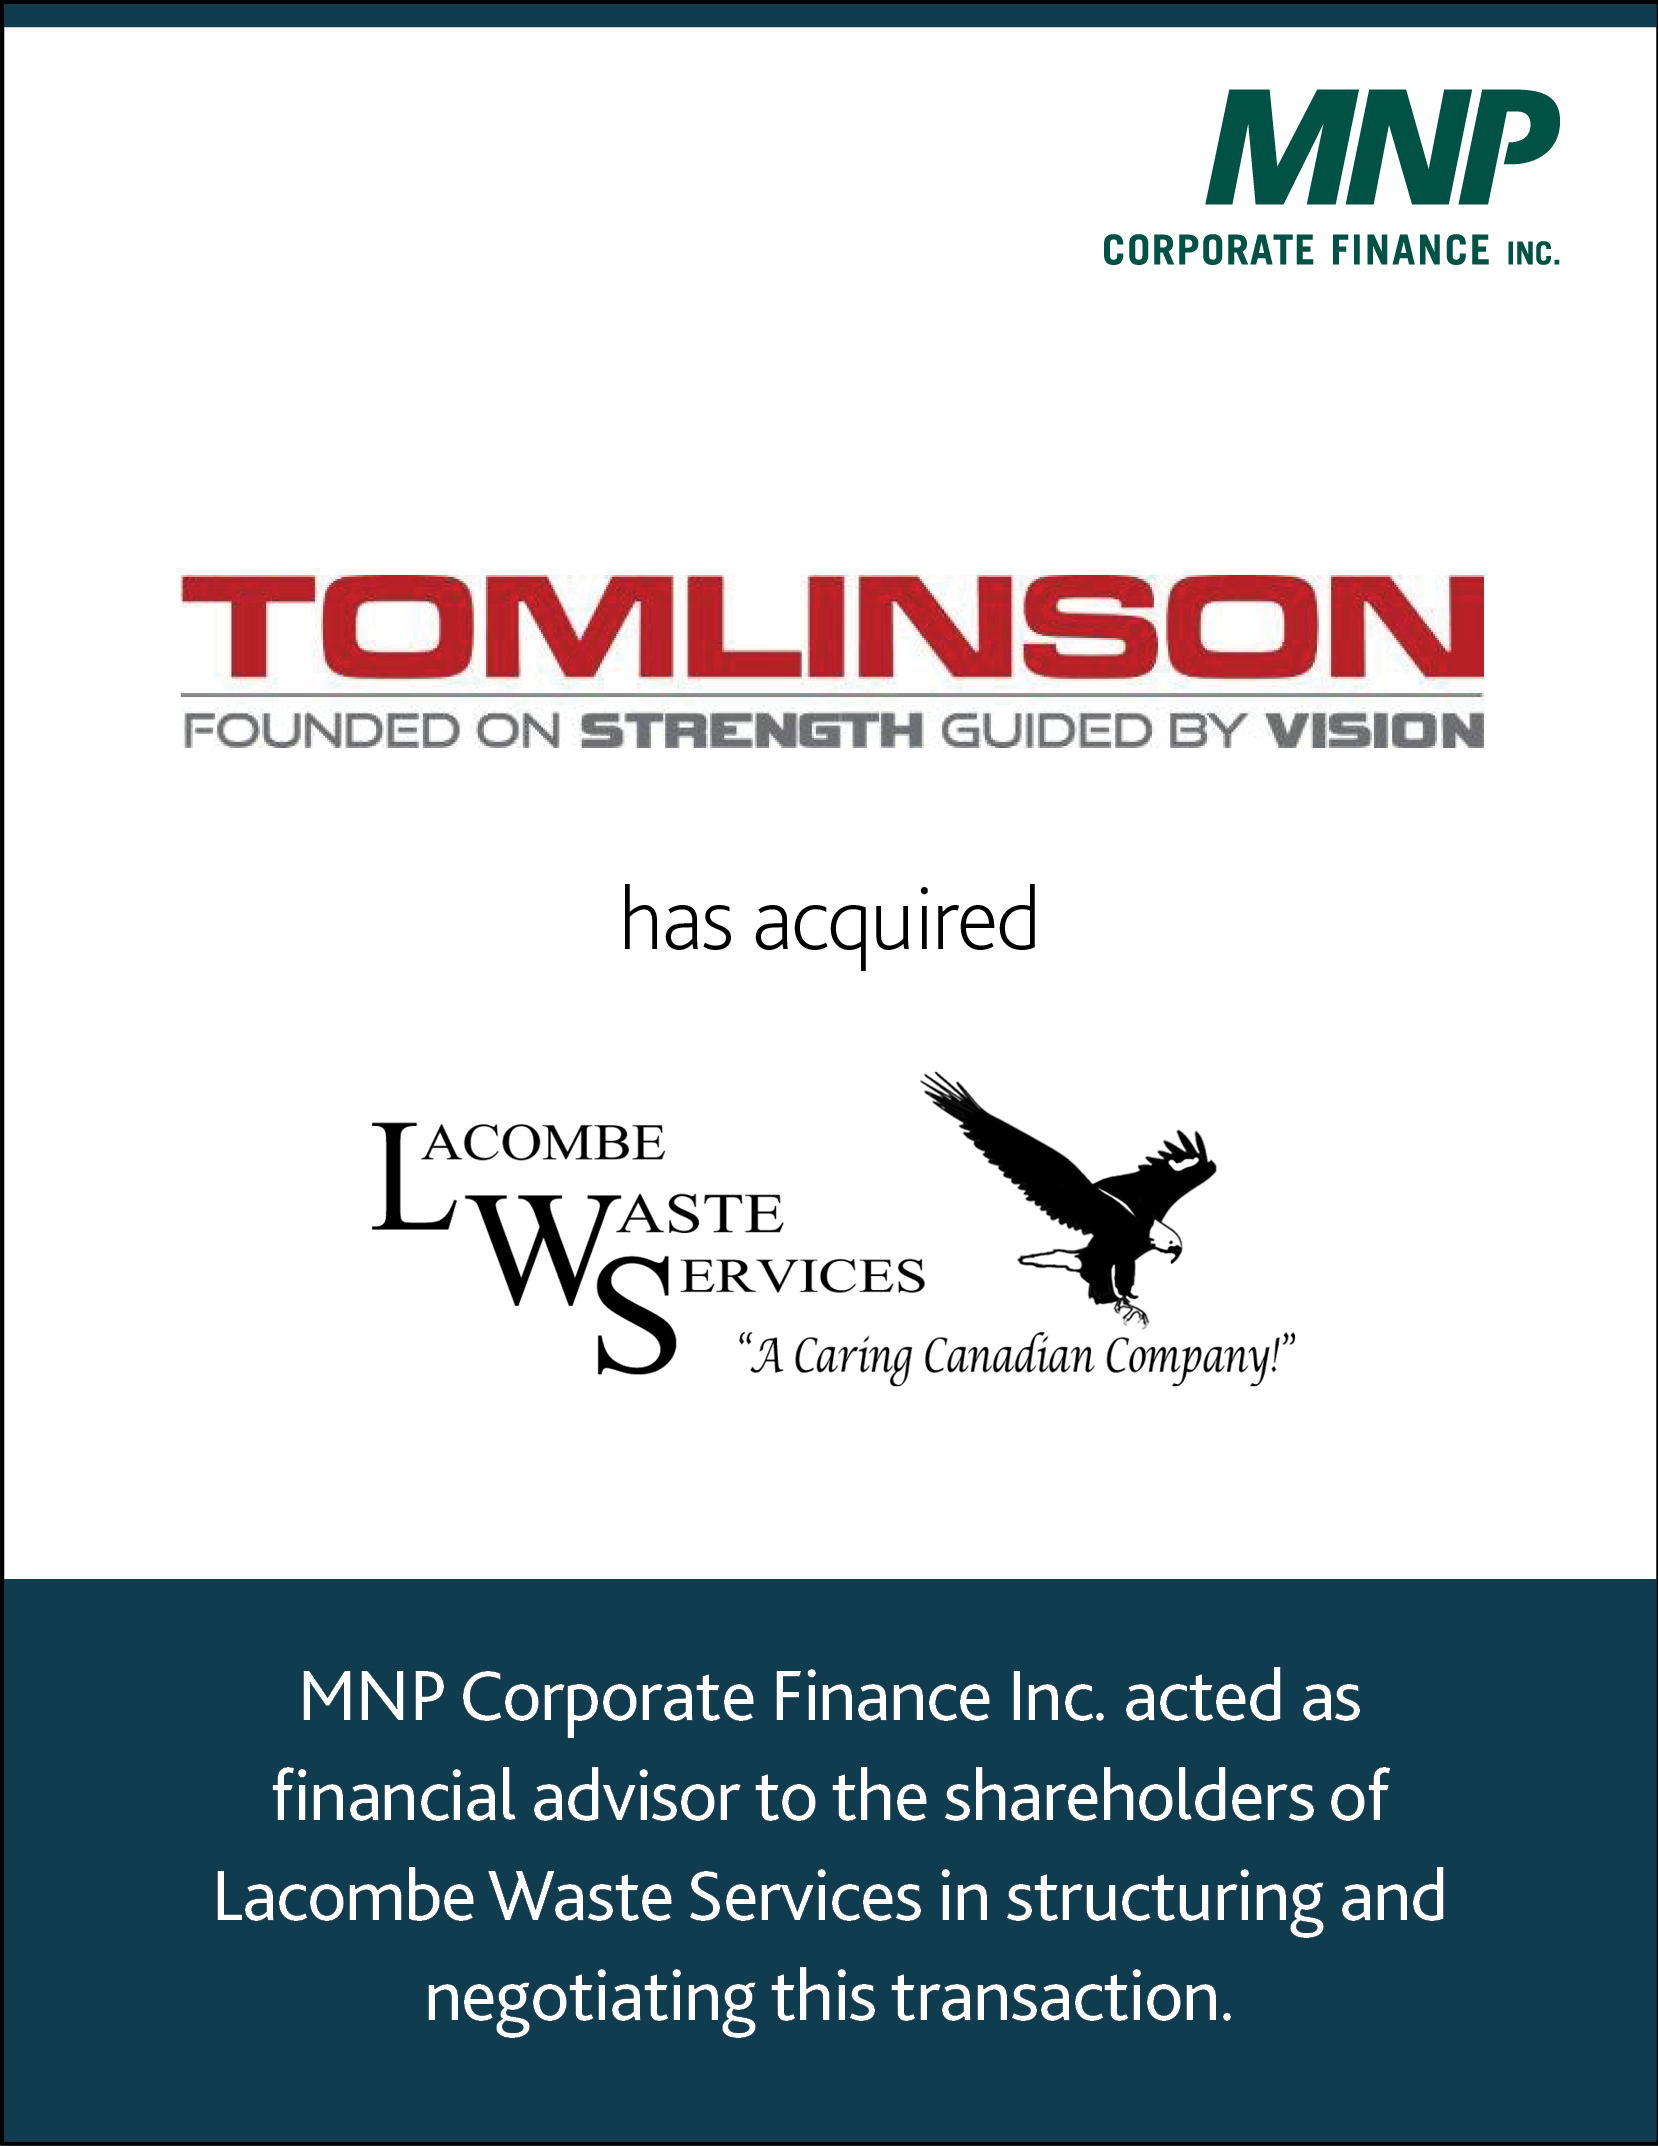 Tomlinson has acquired Lacombe Waste Services. 